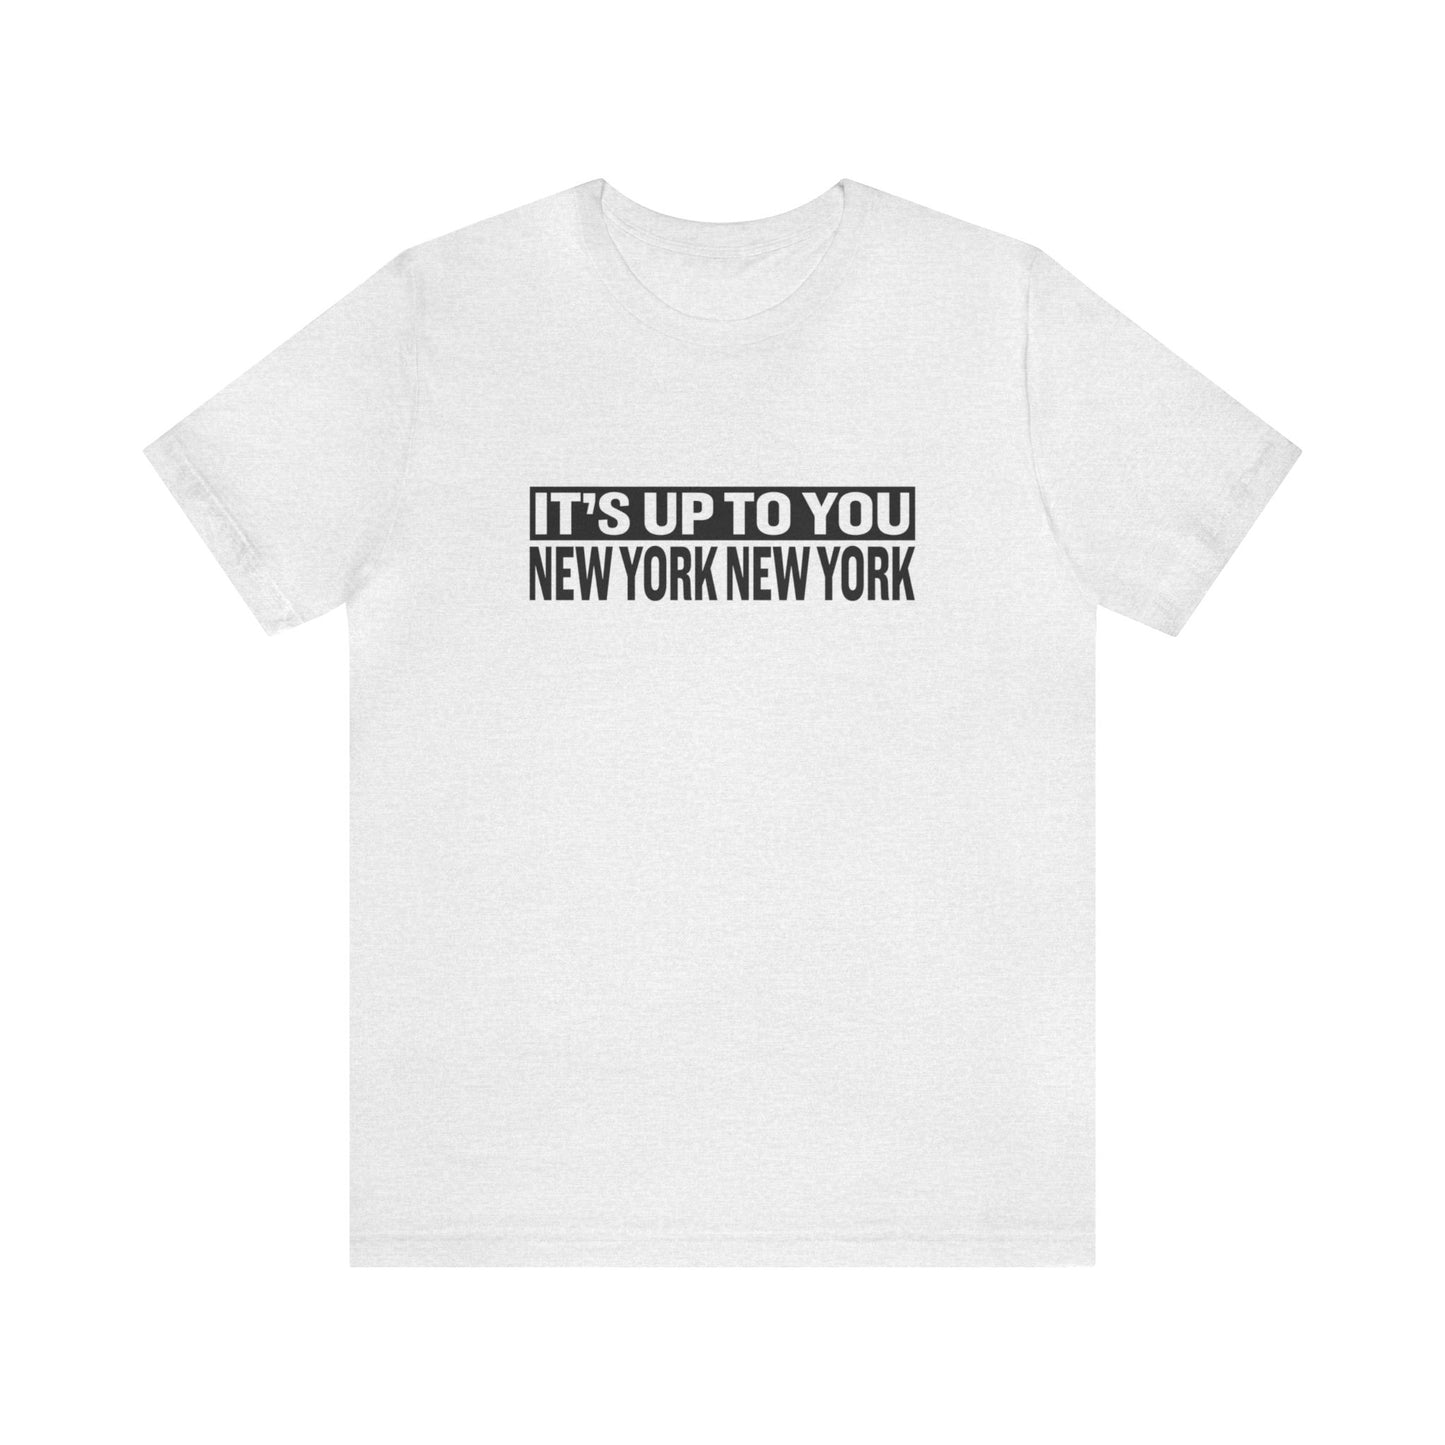 It's Up to You New York New York - Unisex T-Shirt